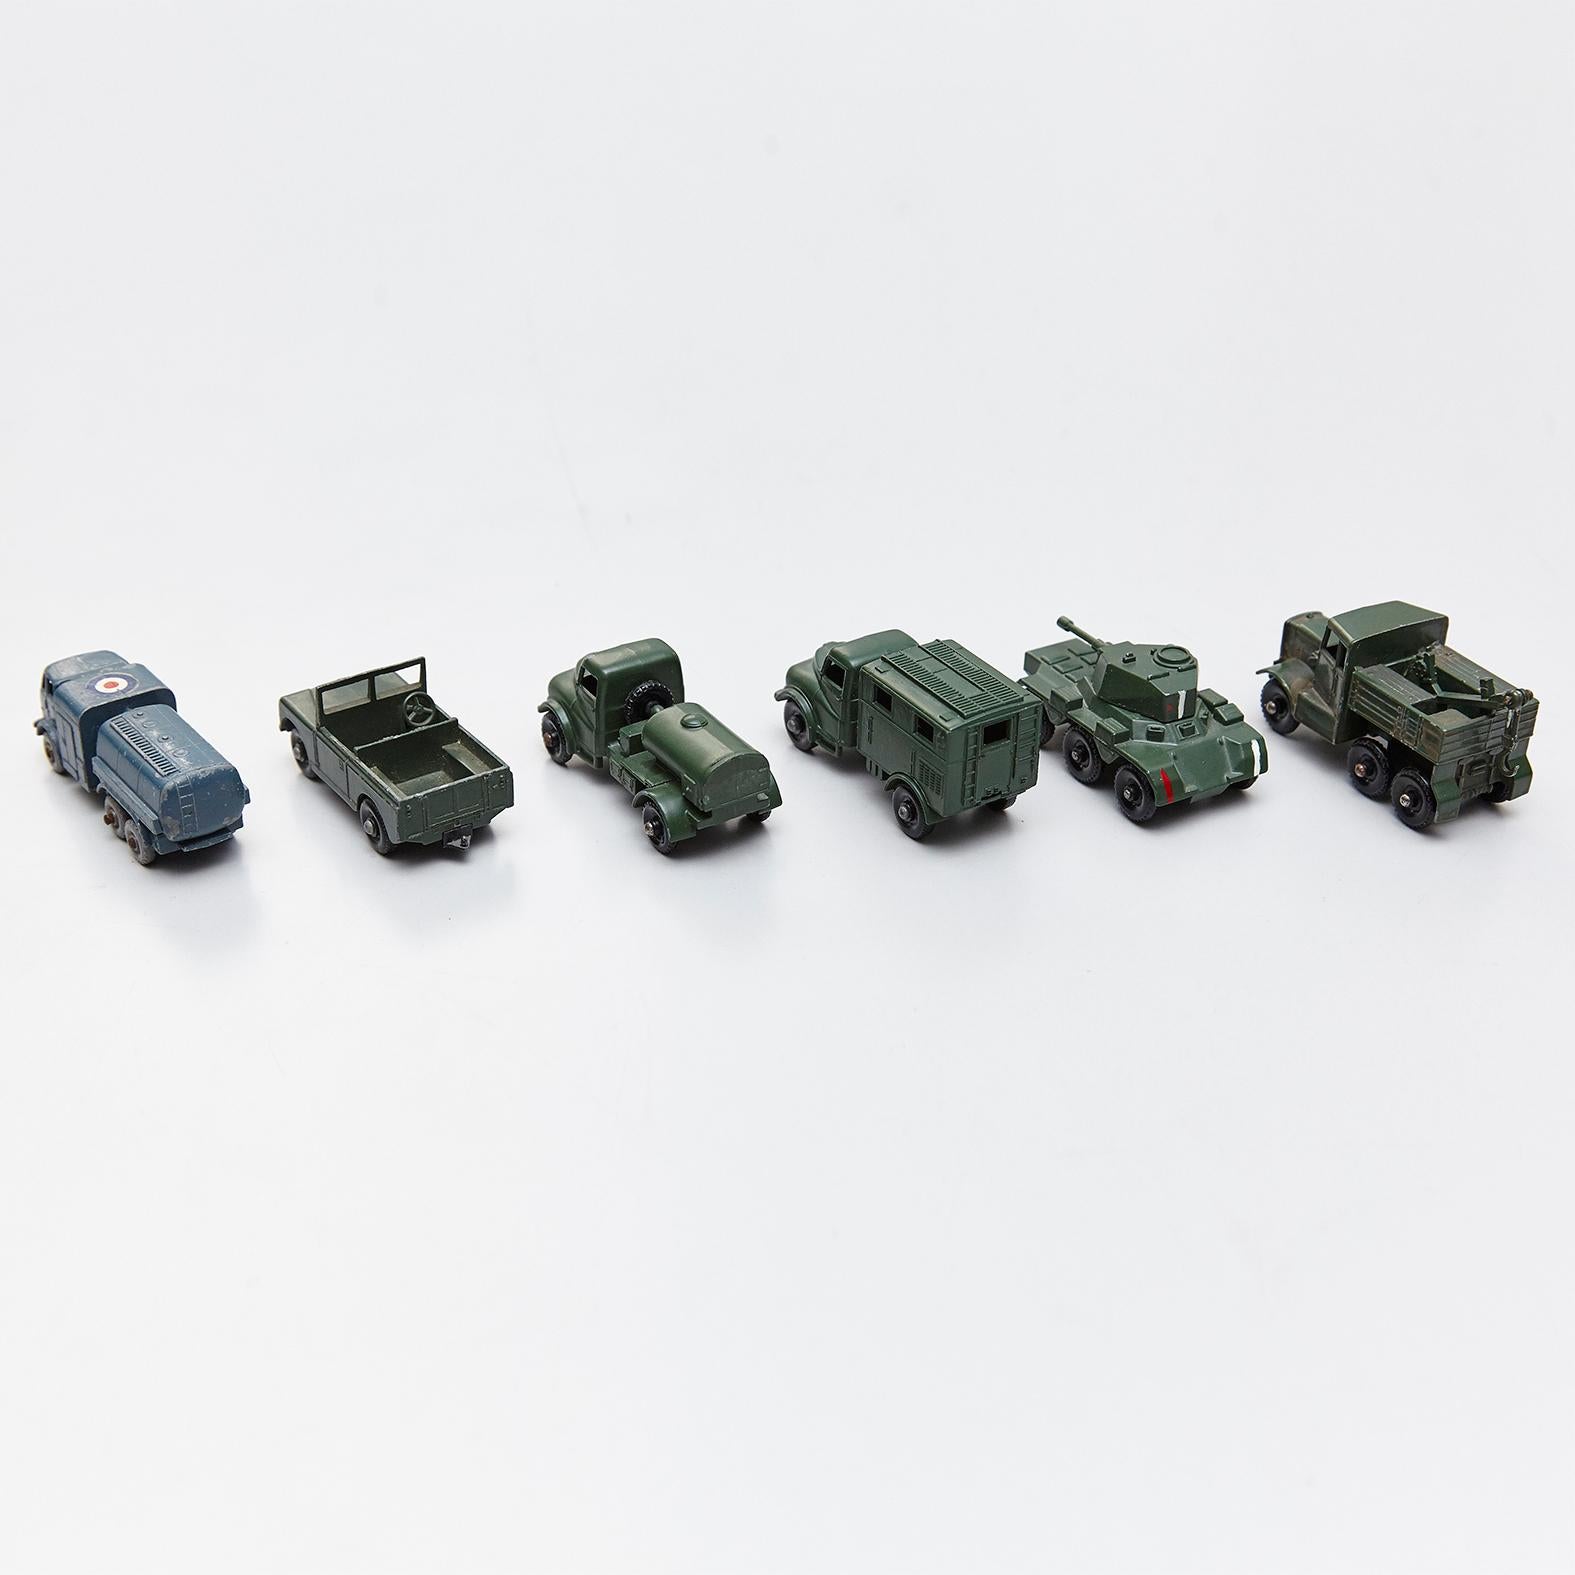 Six cars from Lesney Matchboxes Series 

We offer free worldwide shipping for this pieces.

Lesney Products & Co. Ltd. was a British manufacturing company responsible for the conception, manufacture, and distribution of die-cast toys under the